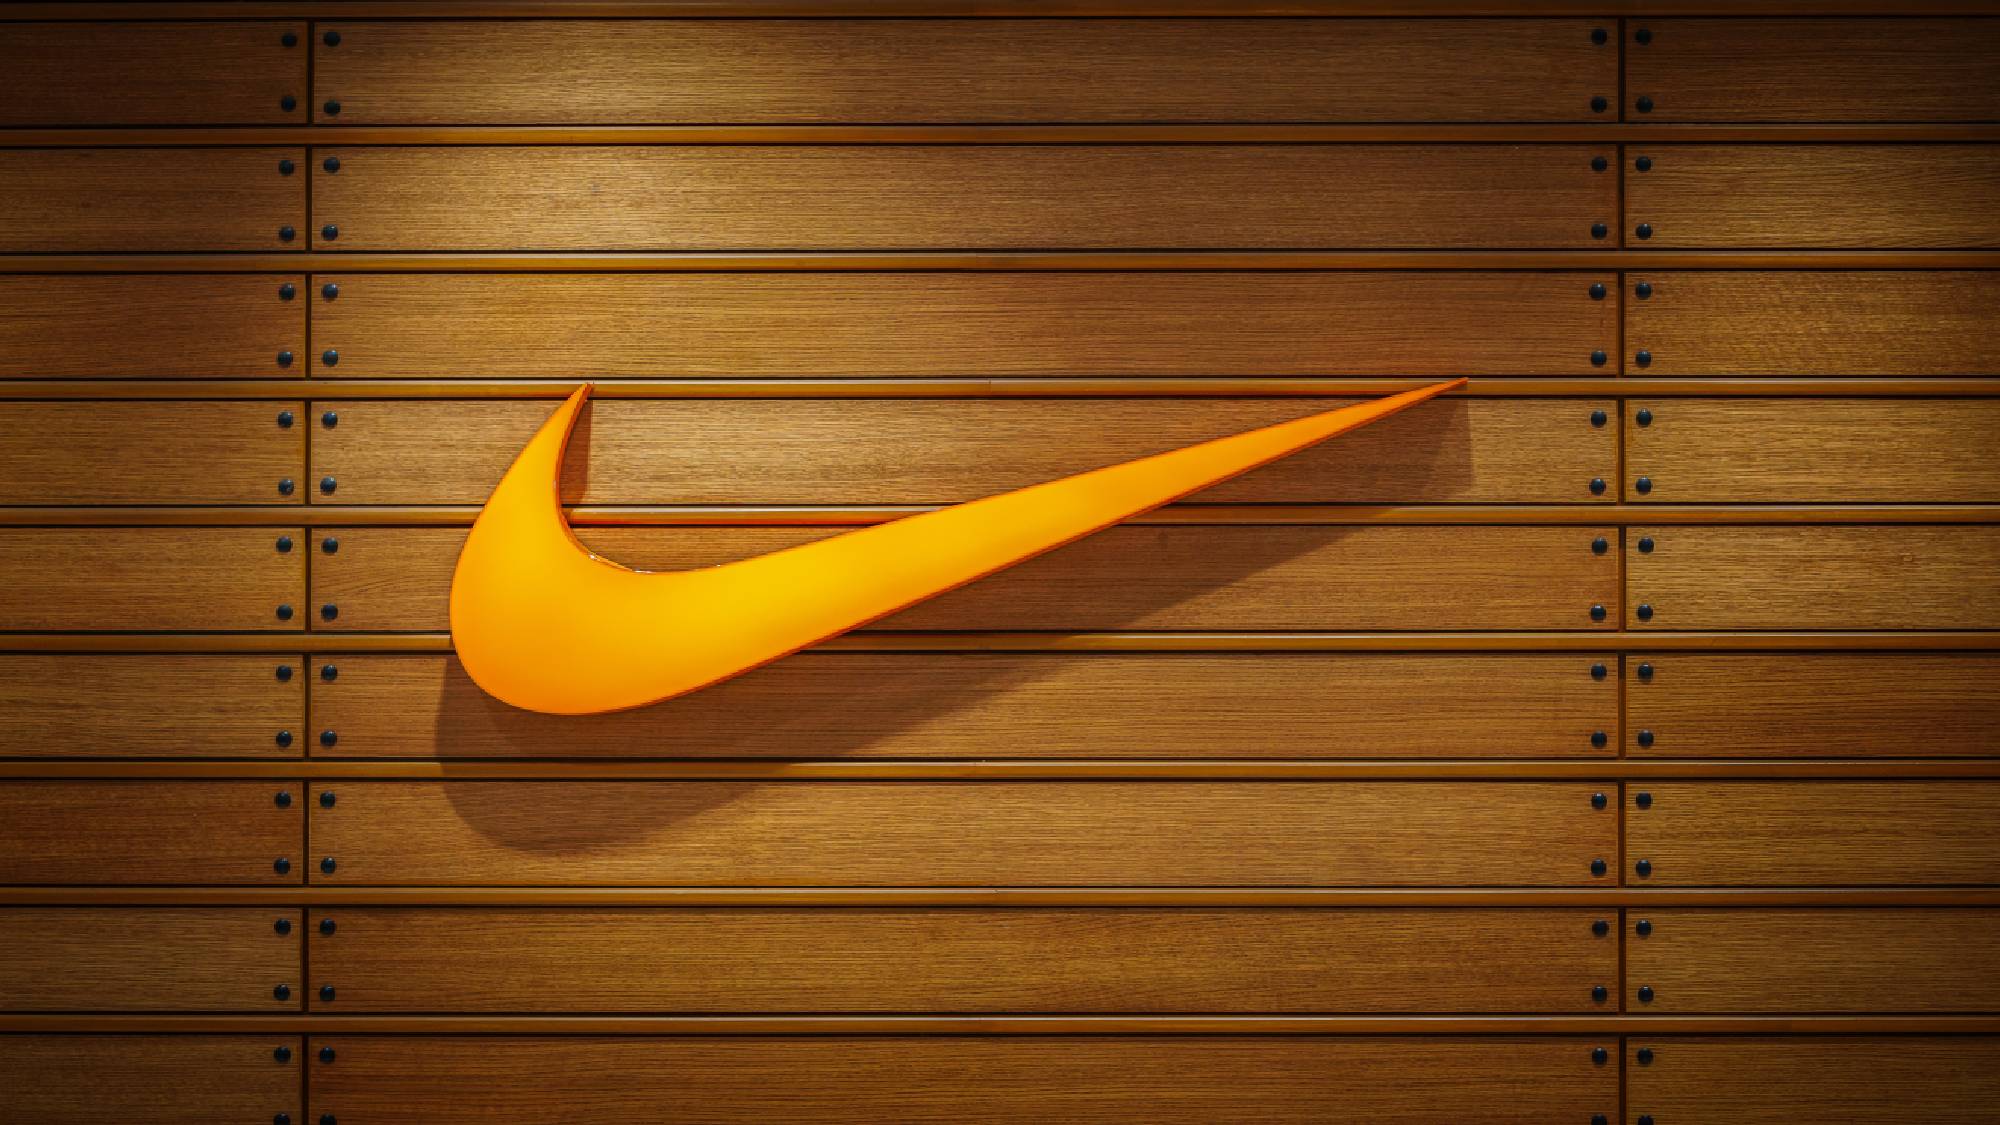 Nike discount — how to find the best | Tom's Guide